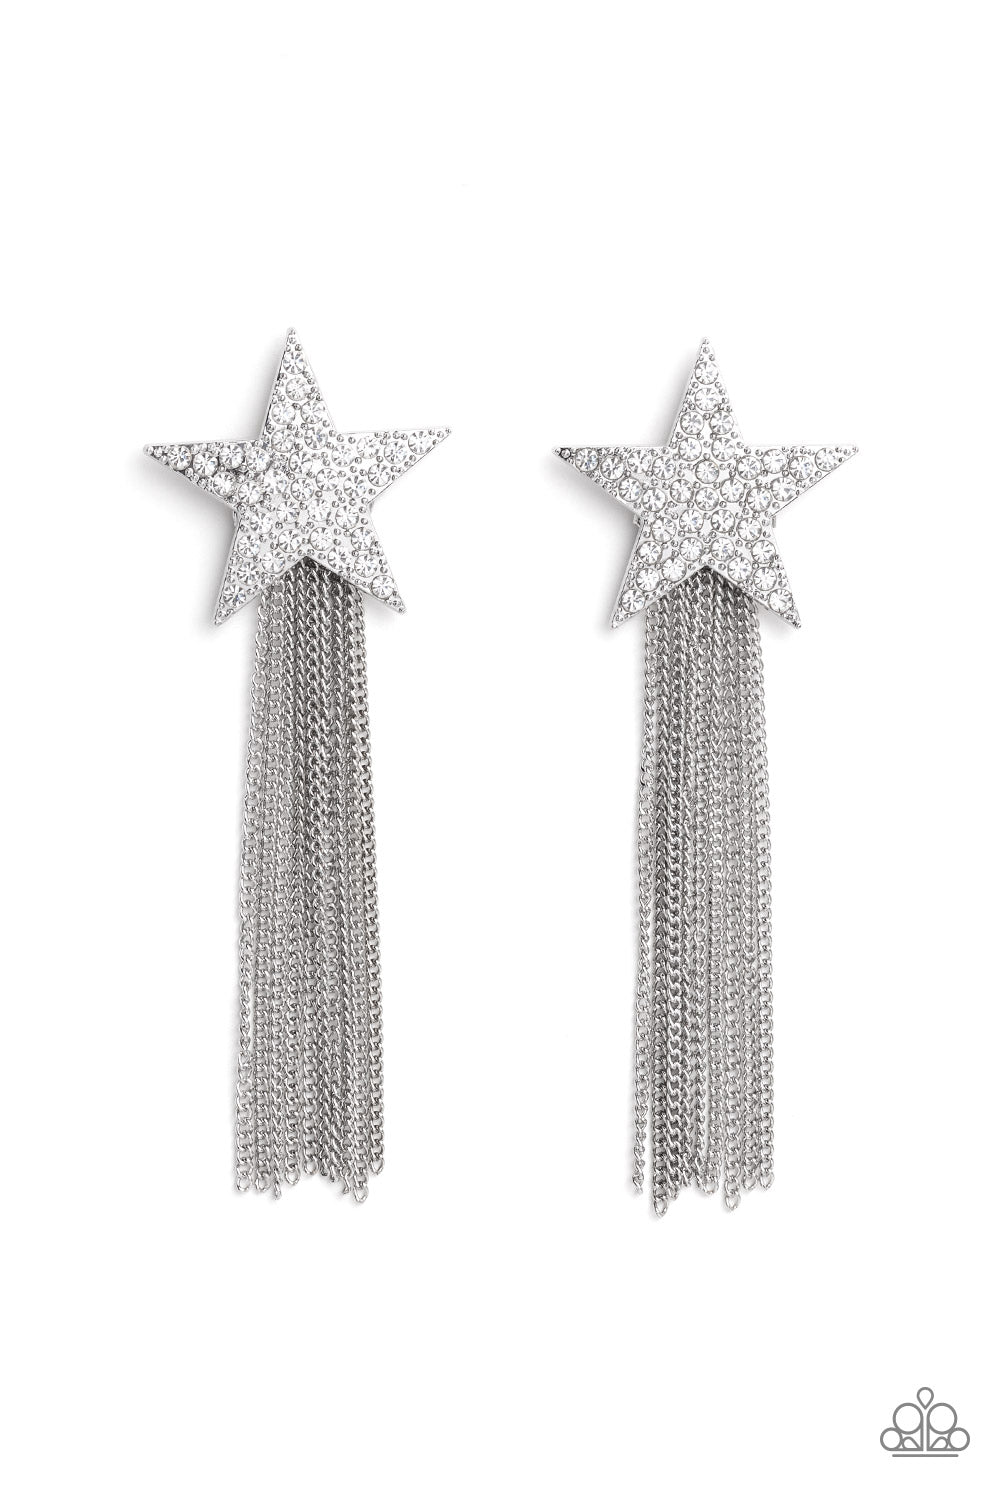 Paparazzi Superstar Solo White Post Earrings - Life of the Party Exclusive December 2022 - P5PO-WTXX-317XX